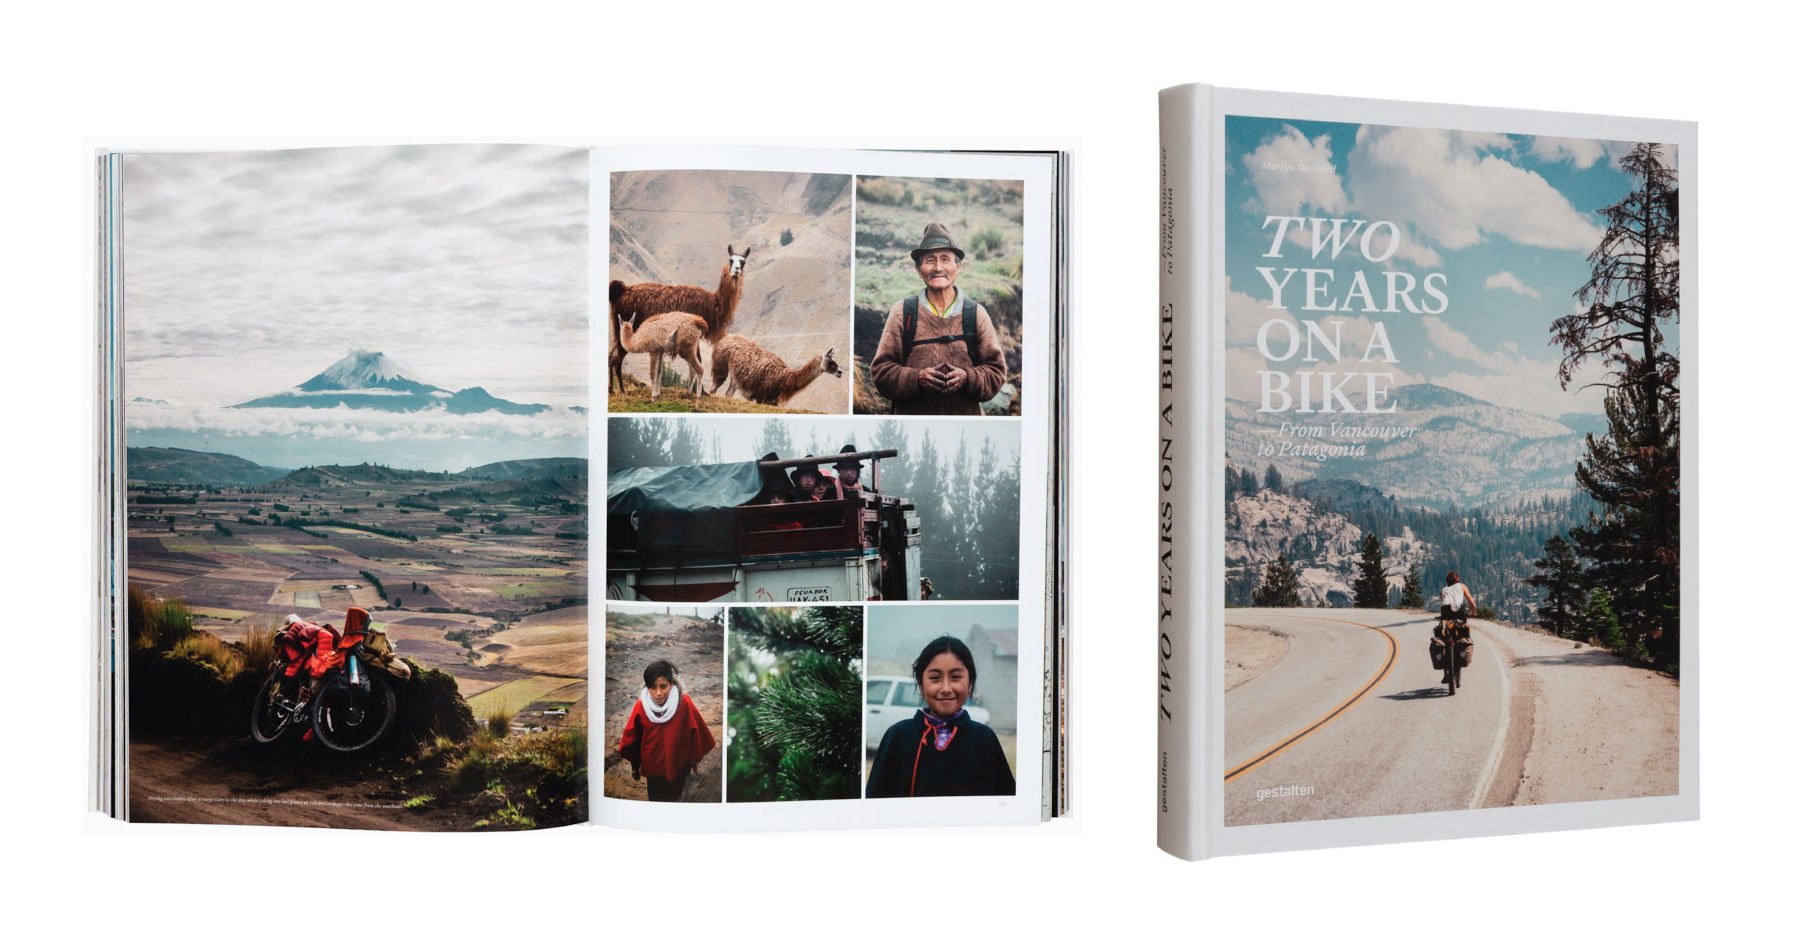 Martijn Doolaard's Two Years on a Bike Book Published in Hardcover